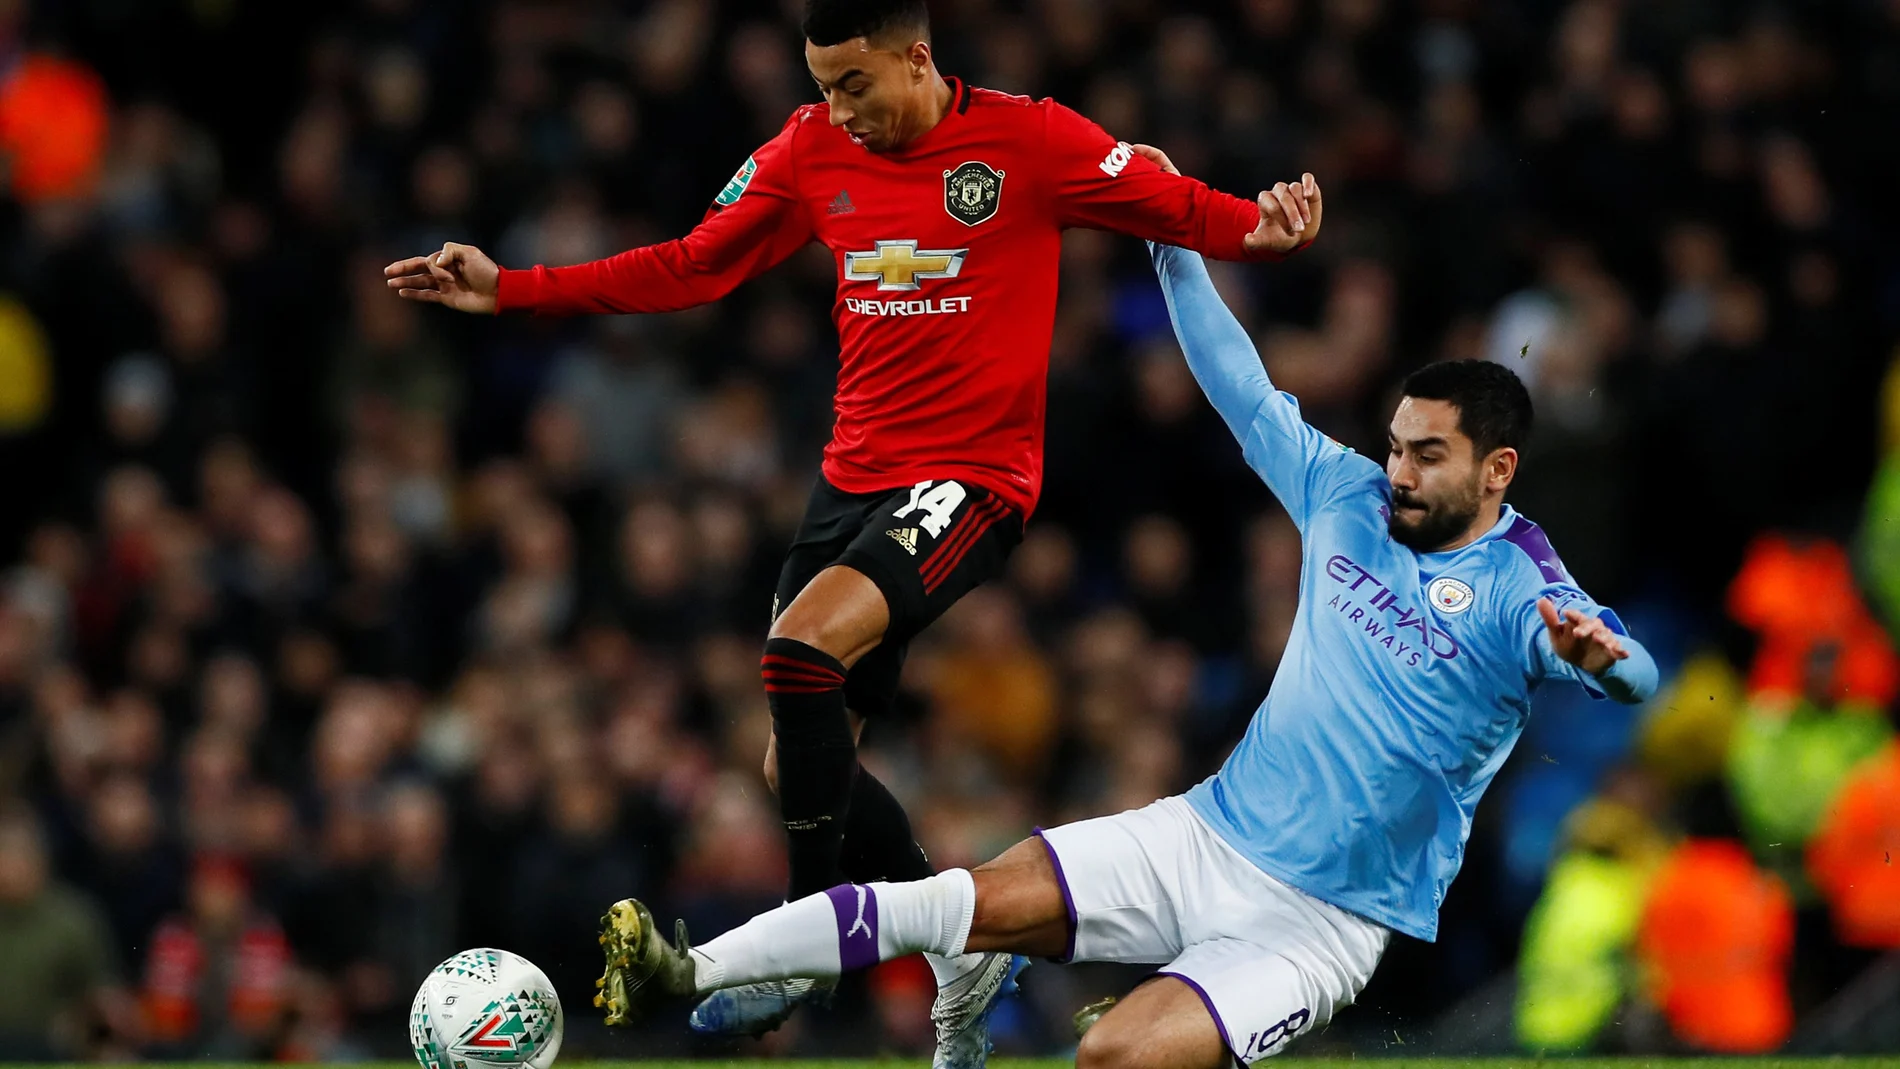 Carabao Cup - Semi Final Second Leg - Manchester City v Manchester United